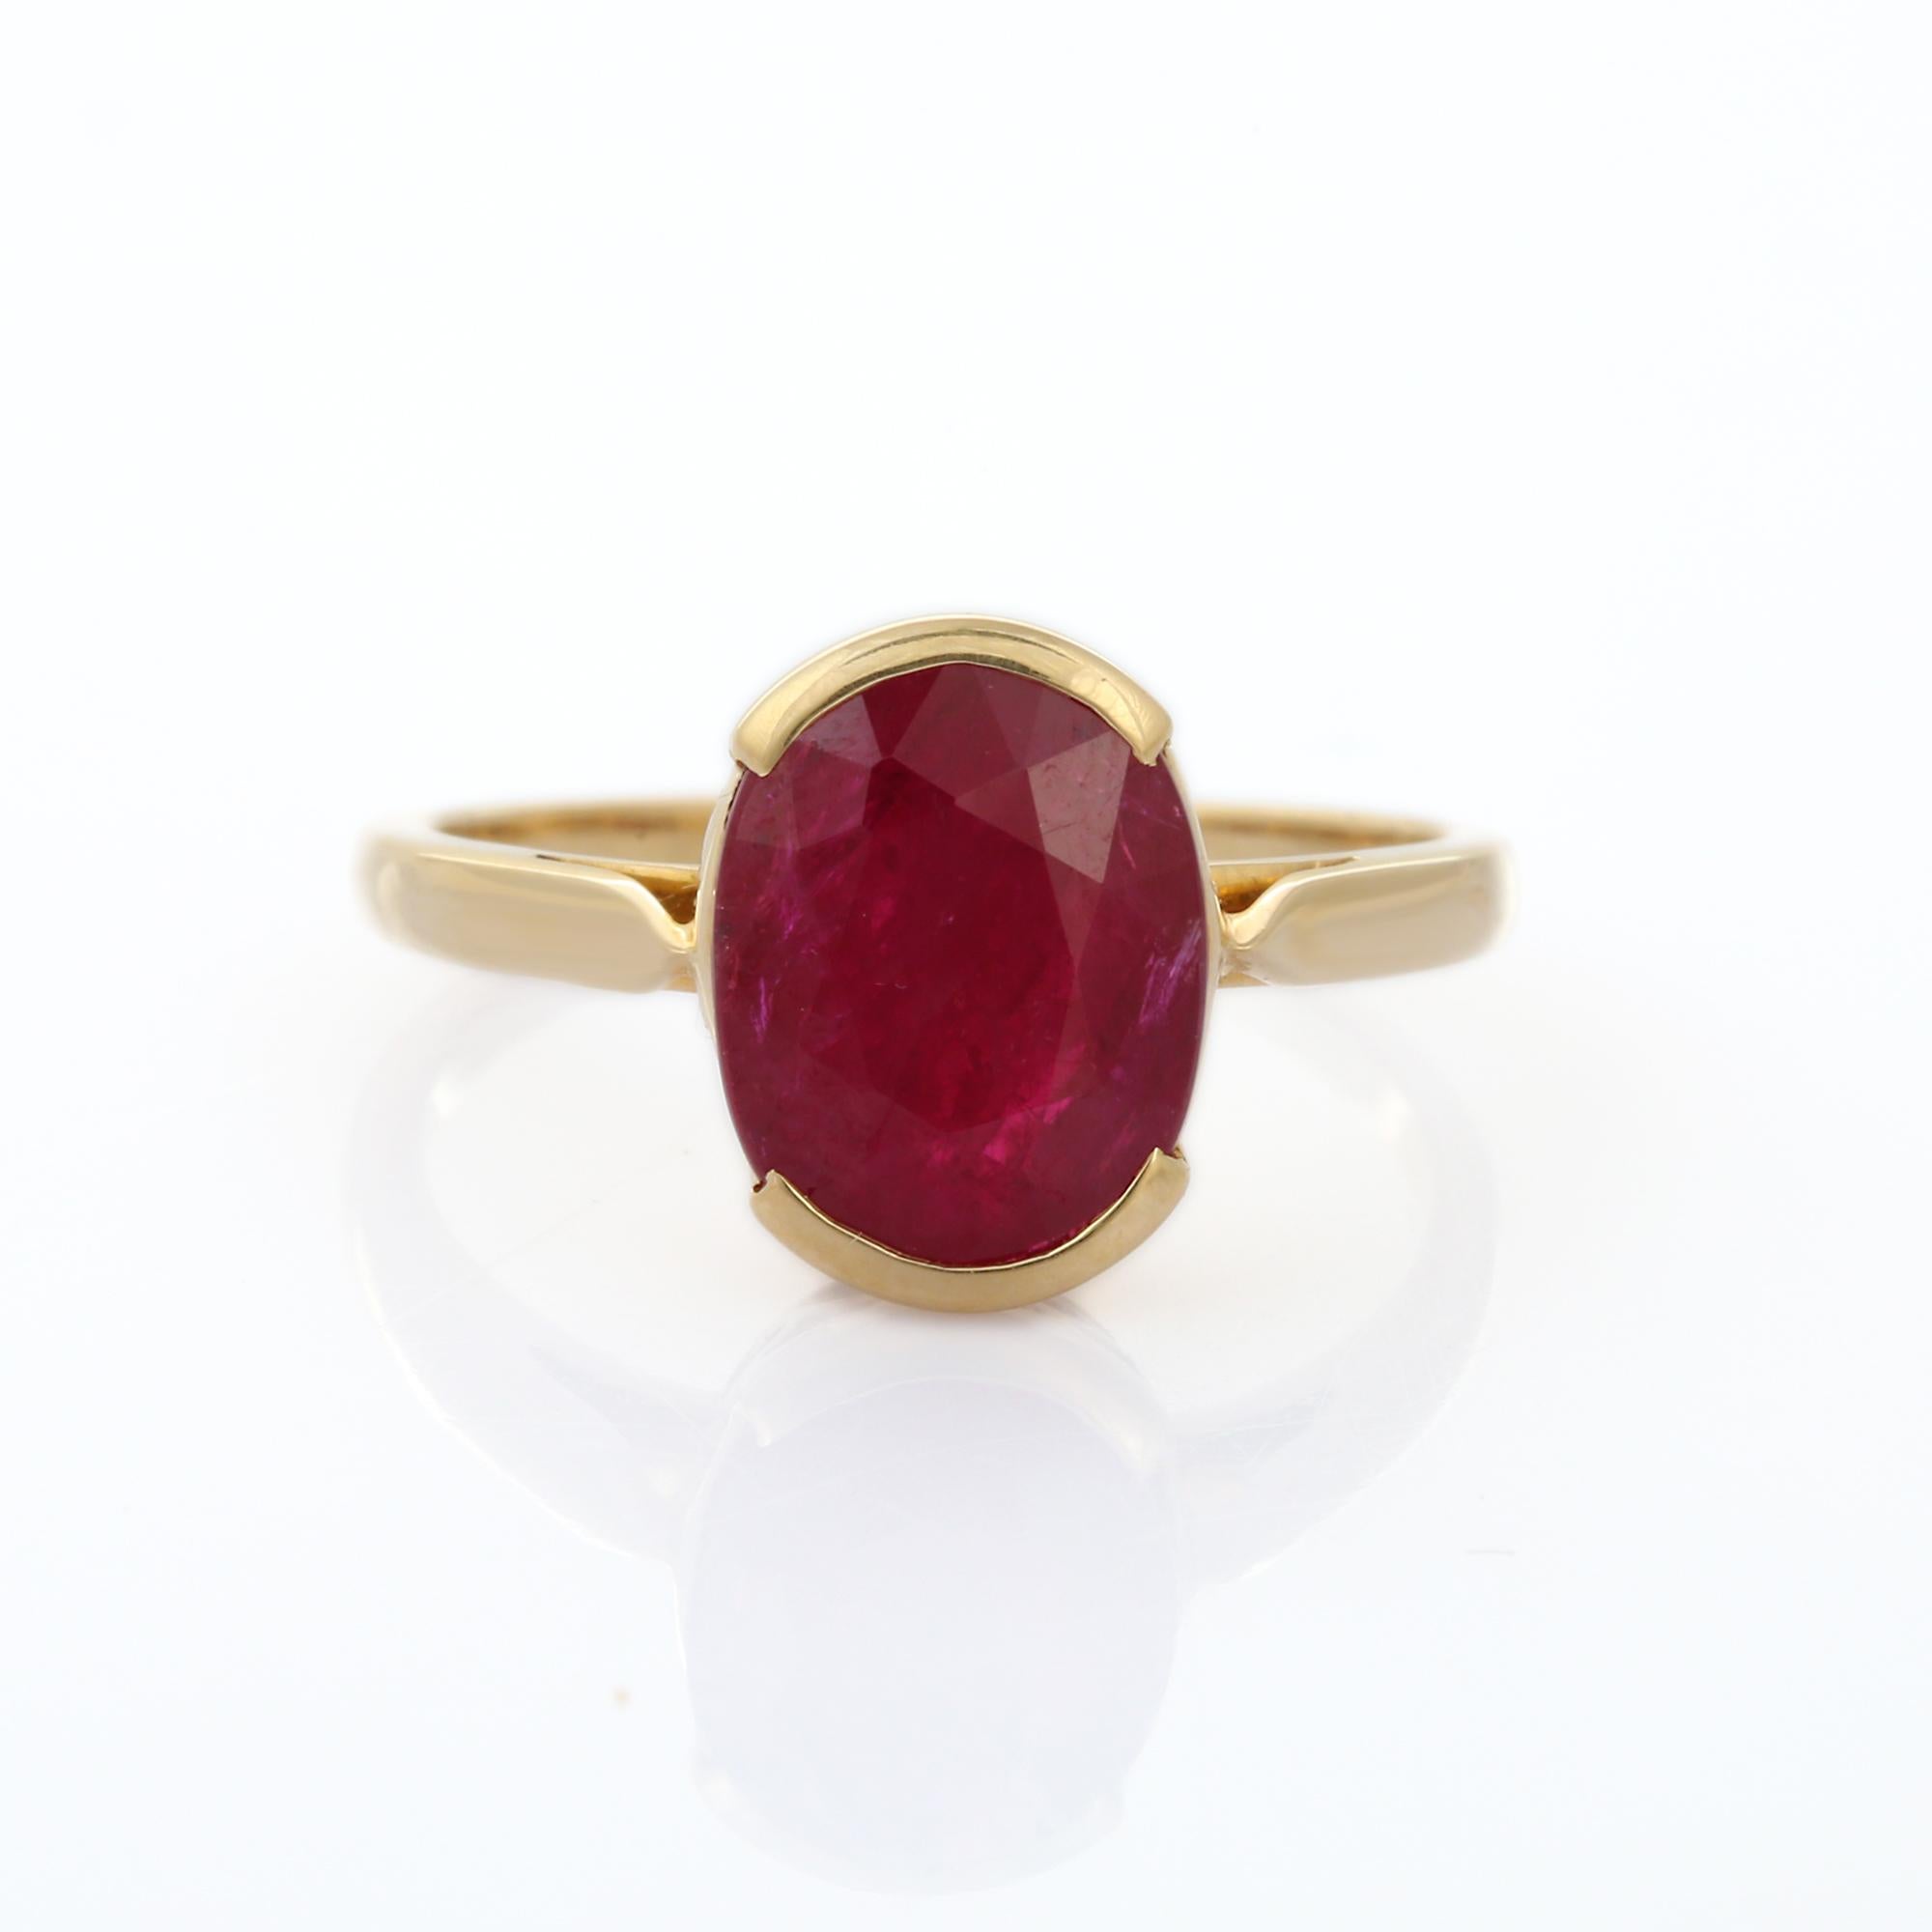 For Sale:  Contemporary Style 3.59 Carat Ruby Oval Cut Cocktail Ring in 14K Yellow Gold   13